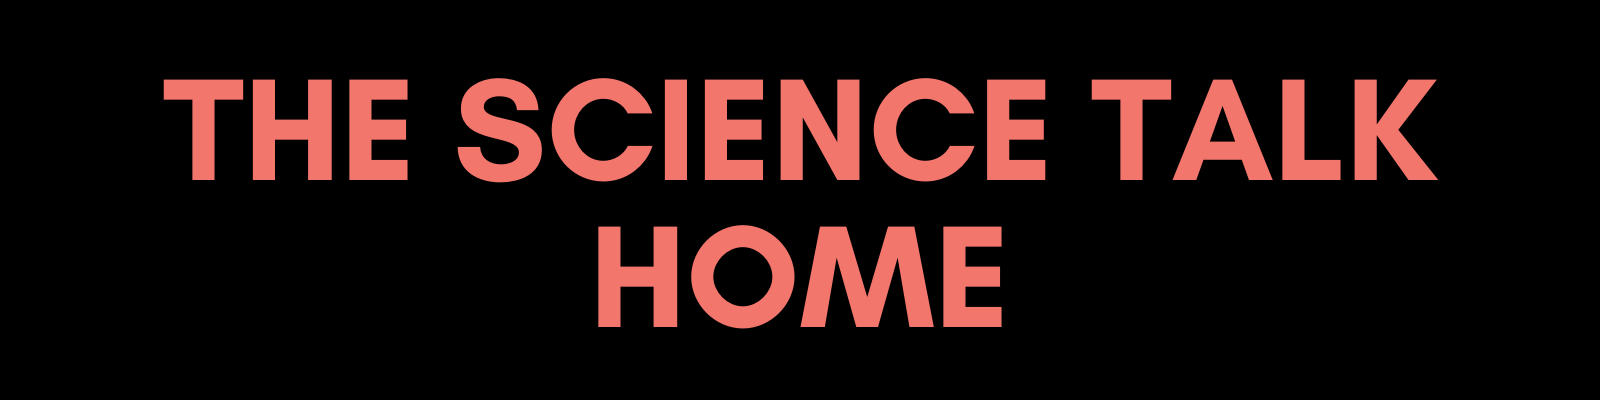 The Science Talk home